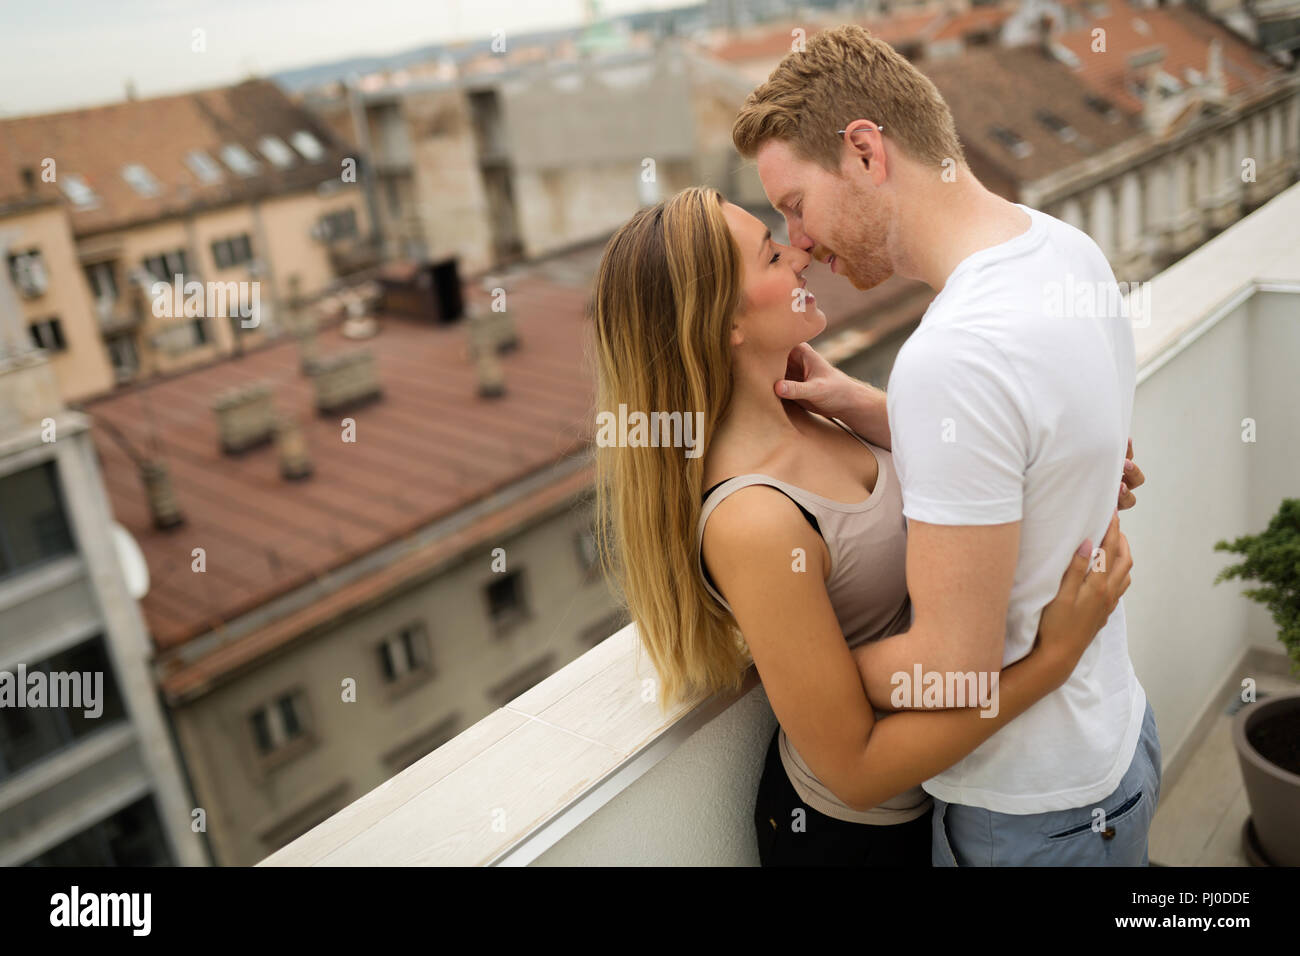 Couple kissing on rooftop Banque D'Images